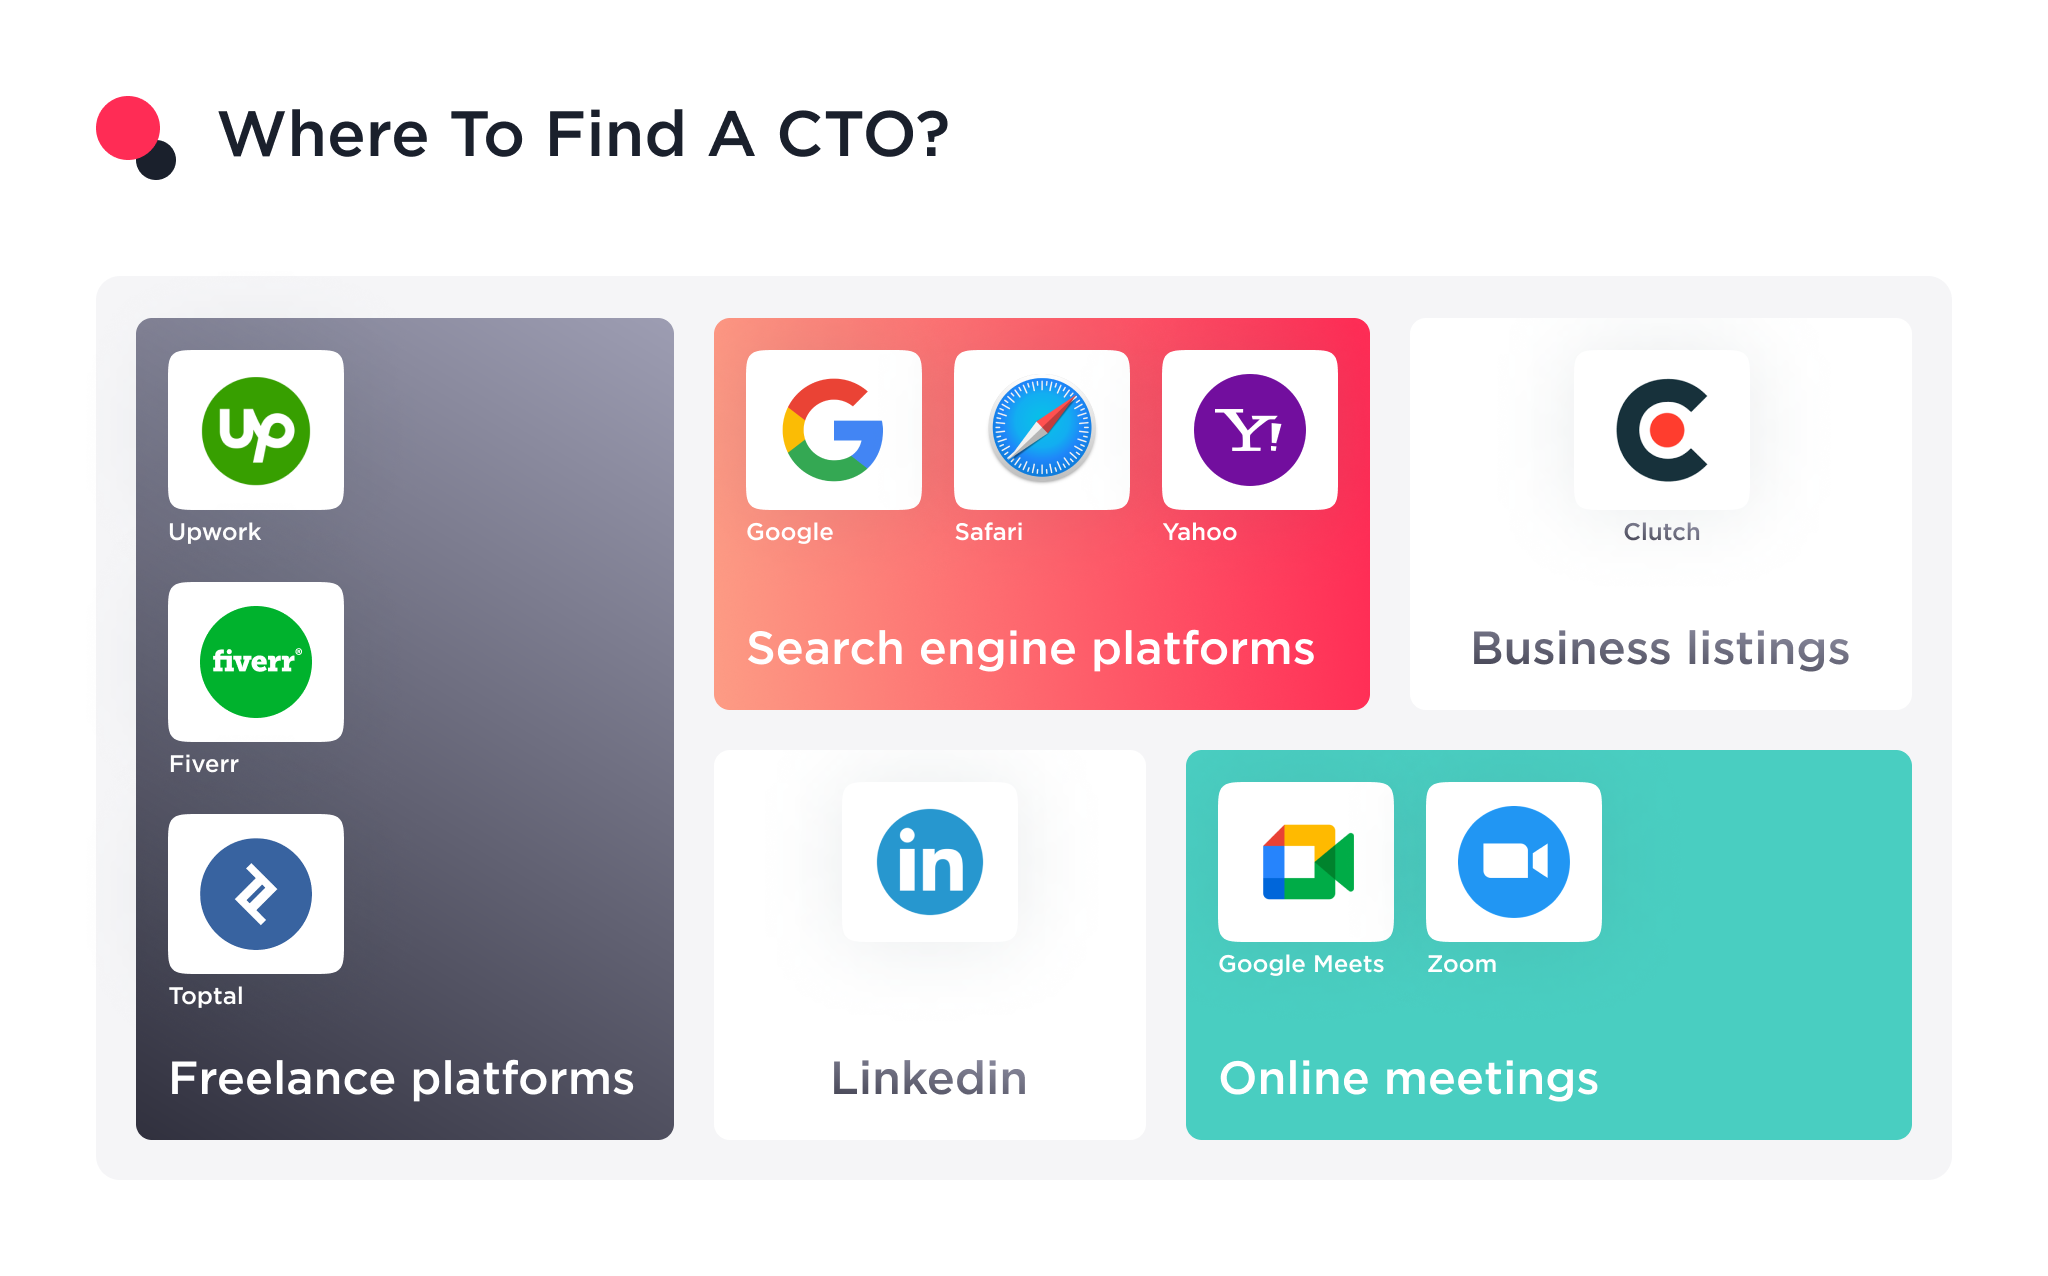 The image shows where to look for hiring a chief technical officer